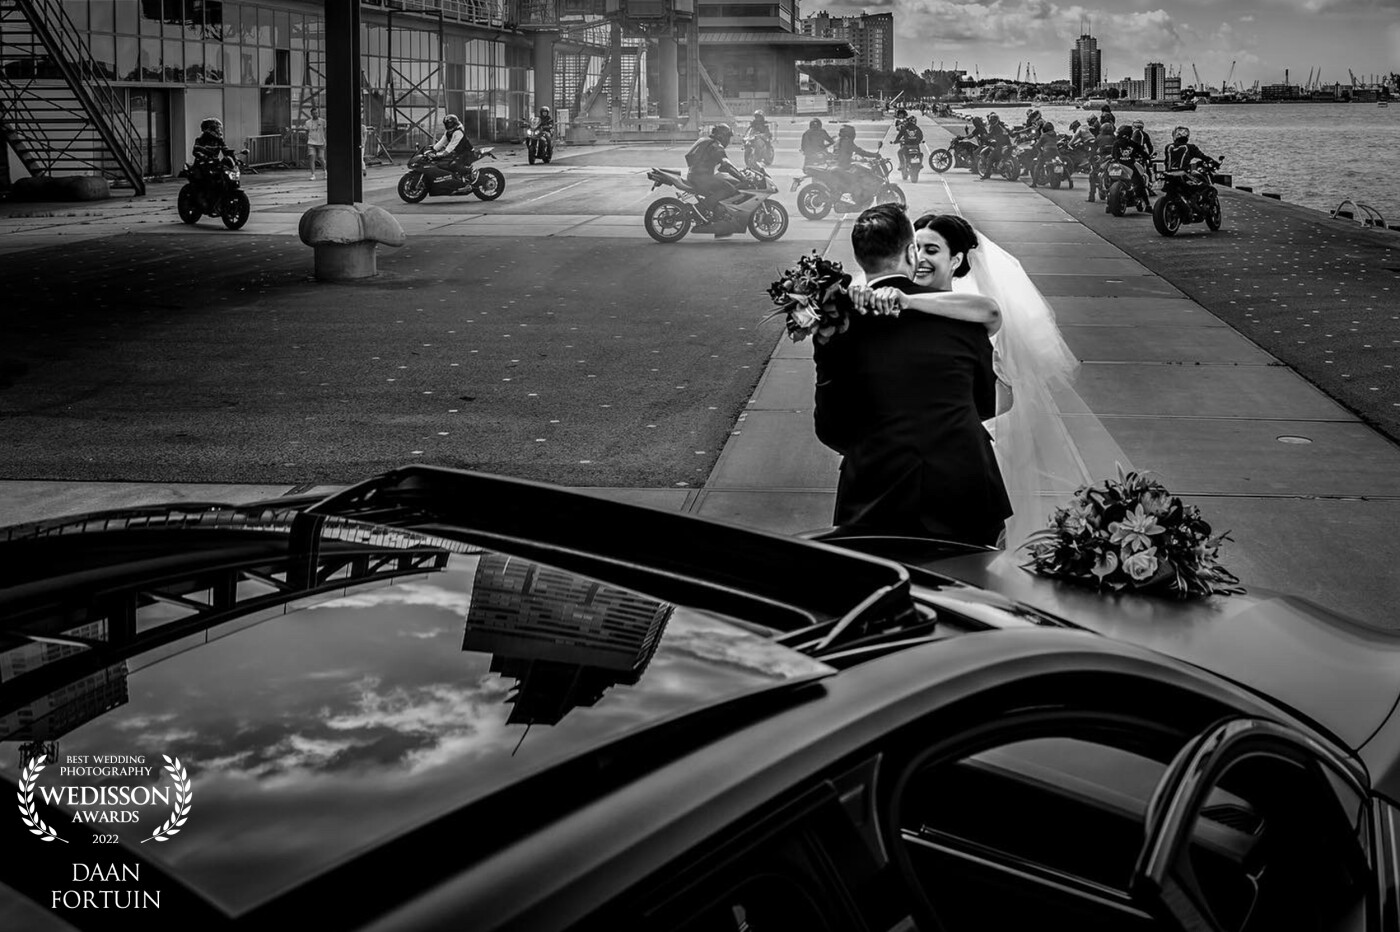 While we were taking pictures this biker gang came and took over the photo location from us .. luckily we just finished and the bridal couple could laugh about it too .. it did make for a cool photo.  ;)